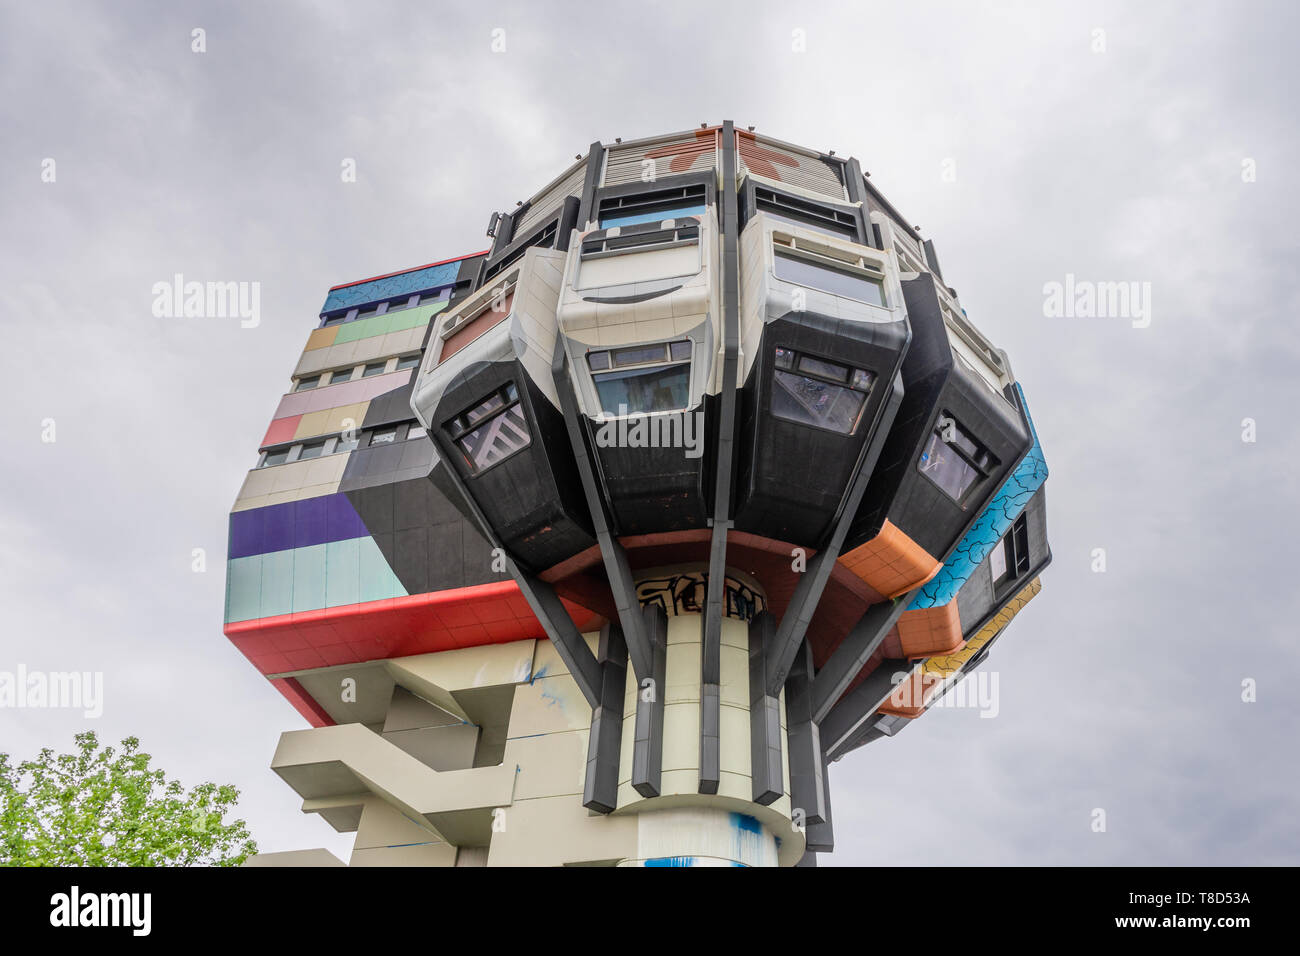 The Bierpinsel (beer brush) photographed from underneath, an iconic and quirky building in the Steglitz district built in the 1970s, Berlin, Germany Stock Photo